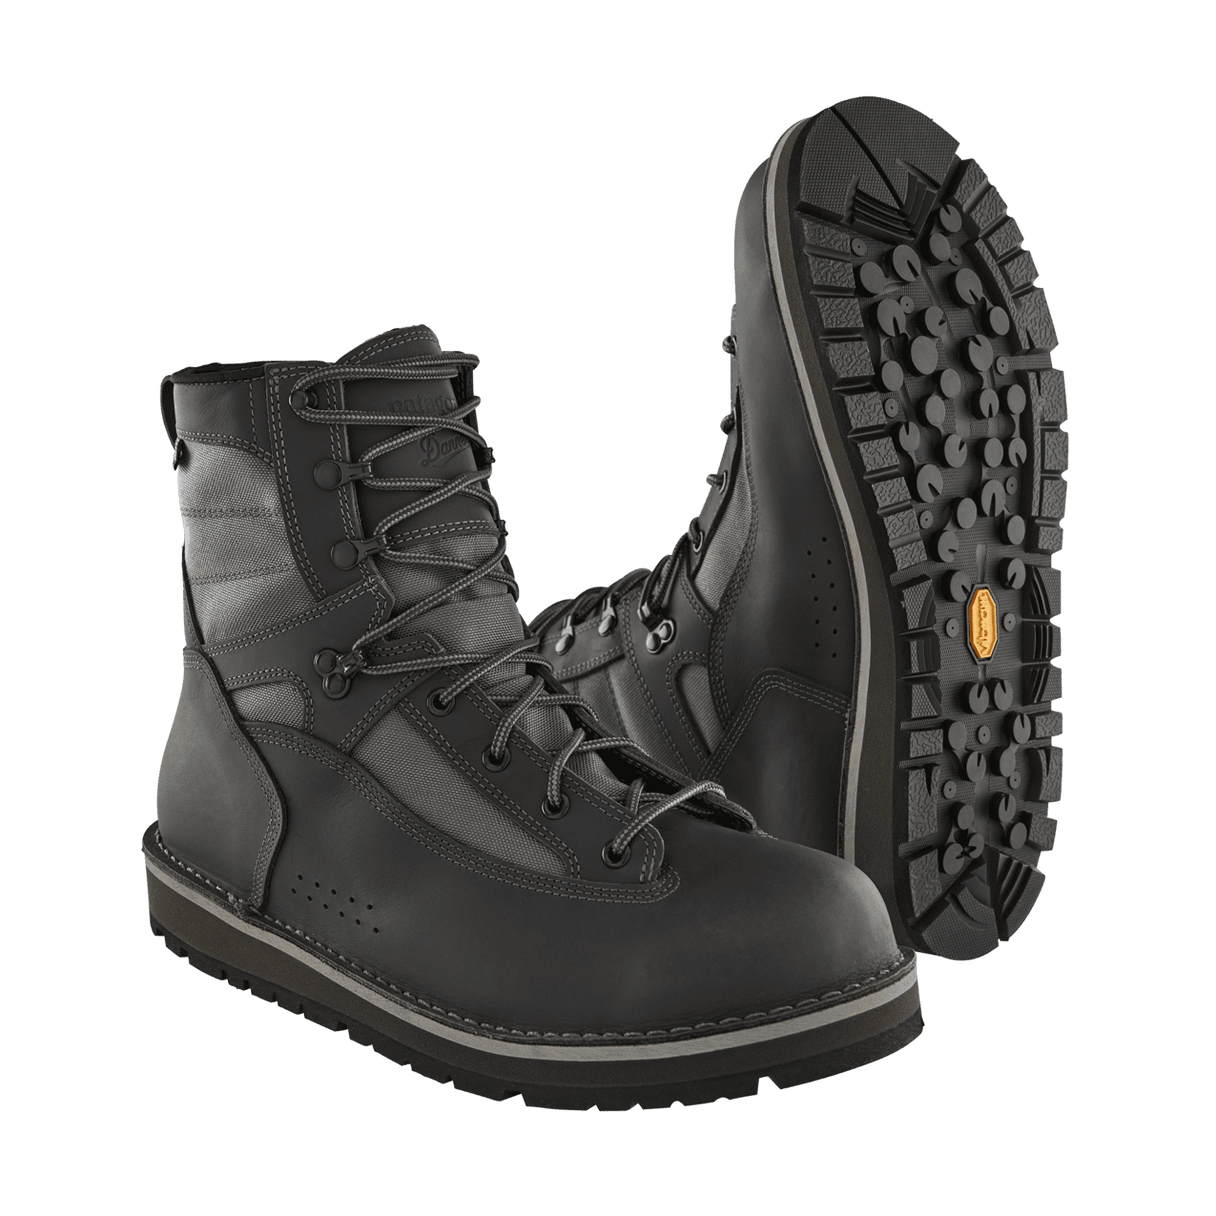 Patagonia Foot Tractor Wading Boots - Sticky Rubber 10